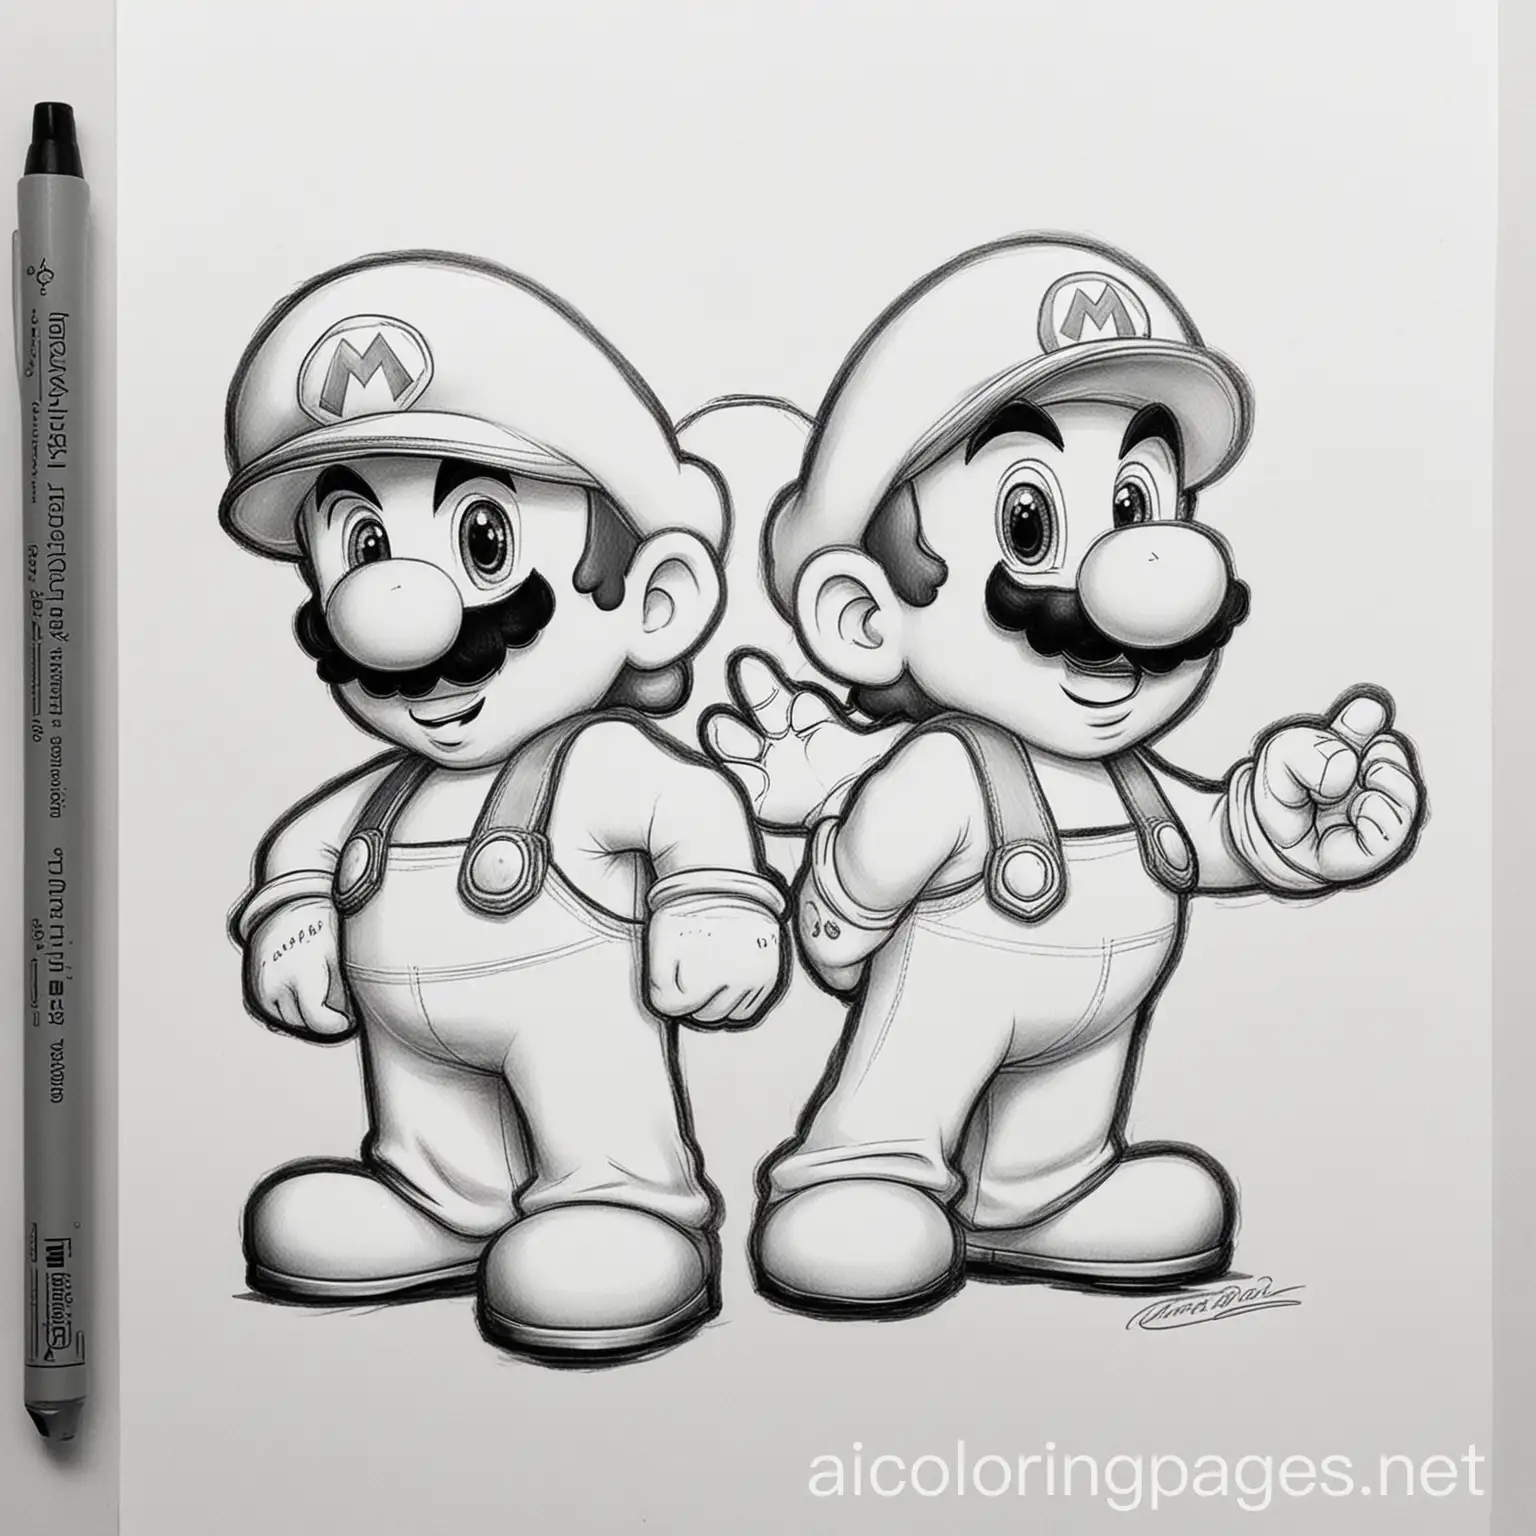 mario and lugi, Coloring Page, black and white, line art, white background, Simplicity, Ample White Space.